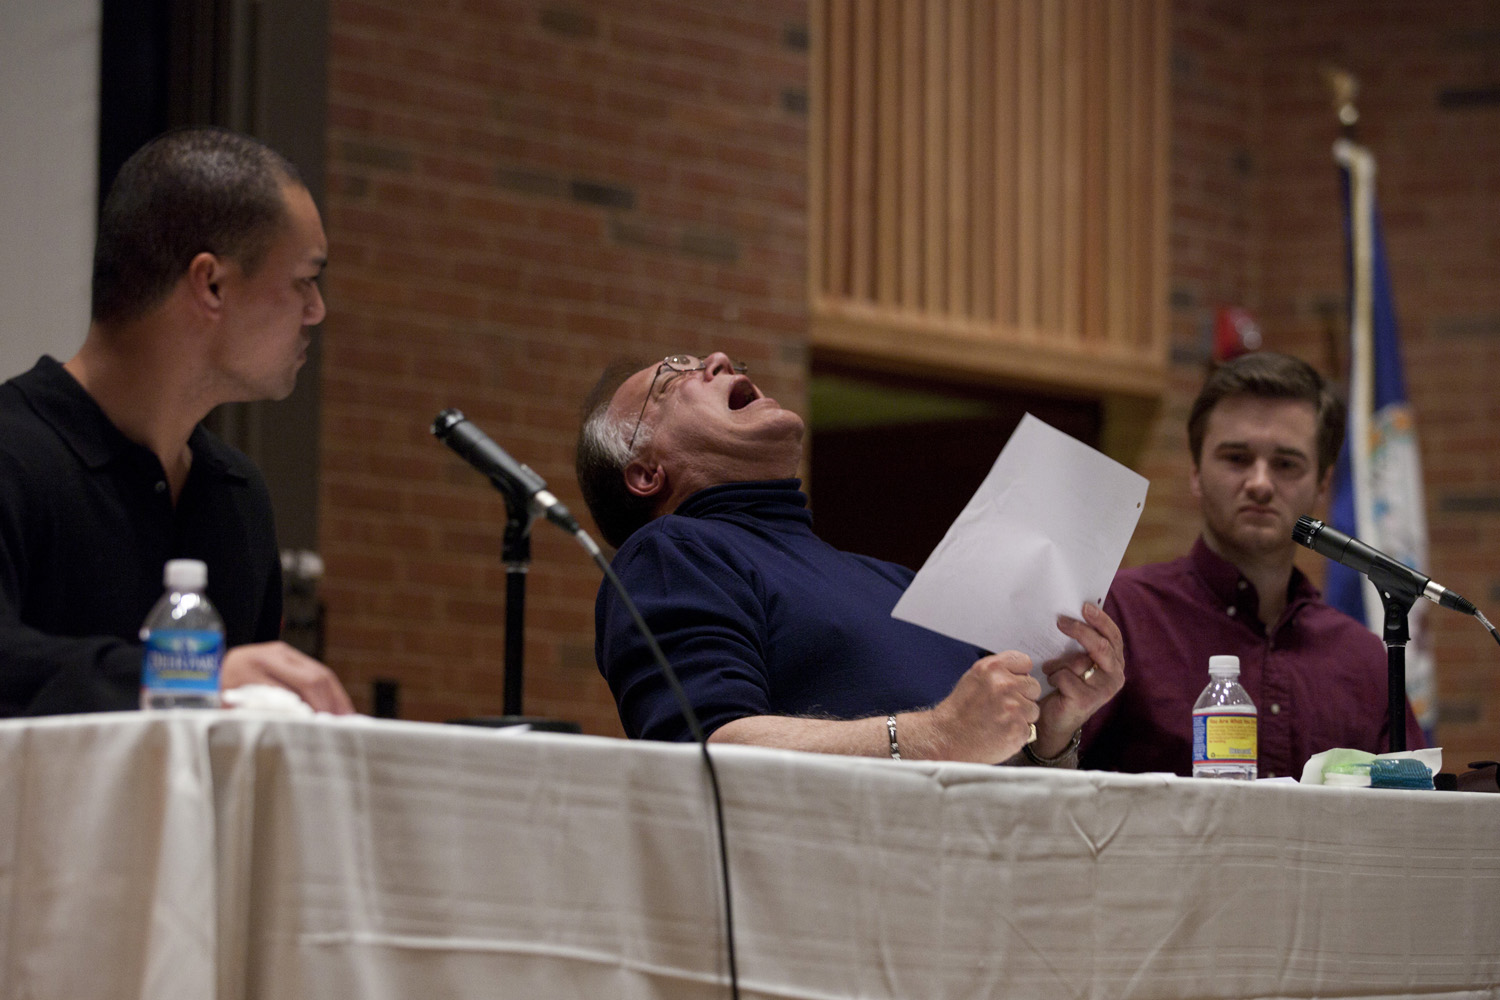 Men reading a script at a table for a crowd.  The man in the middle is in anguish as he puts his head back